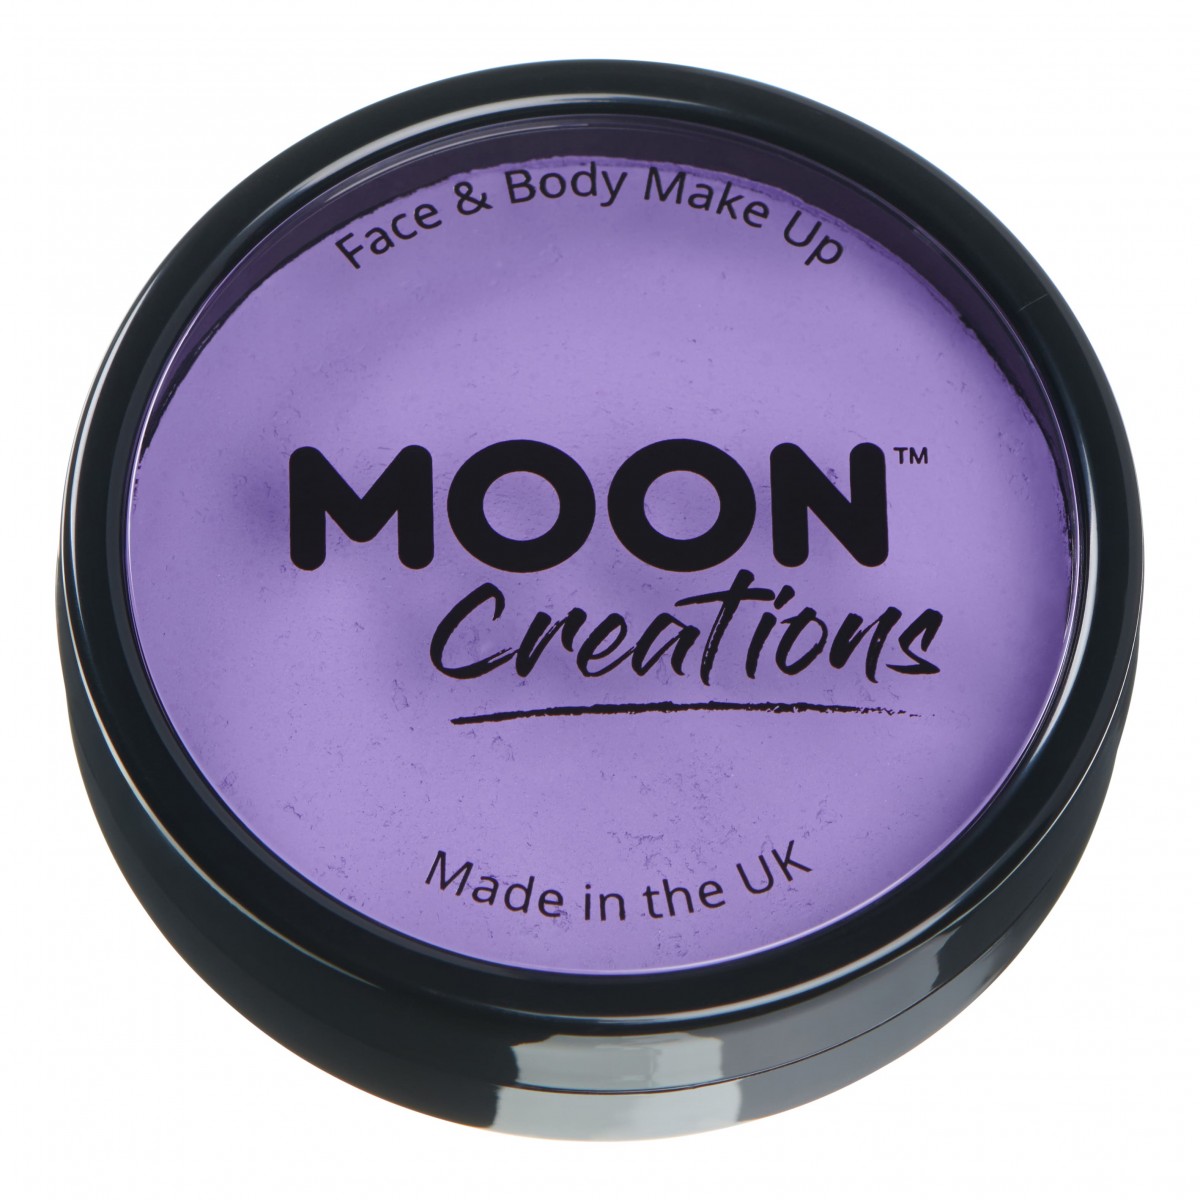 MOON CREATIONS C1 FACE & BODY CAKE MAKEUP LILAC 36g